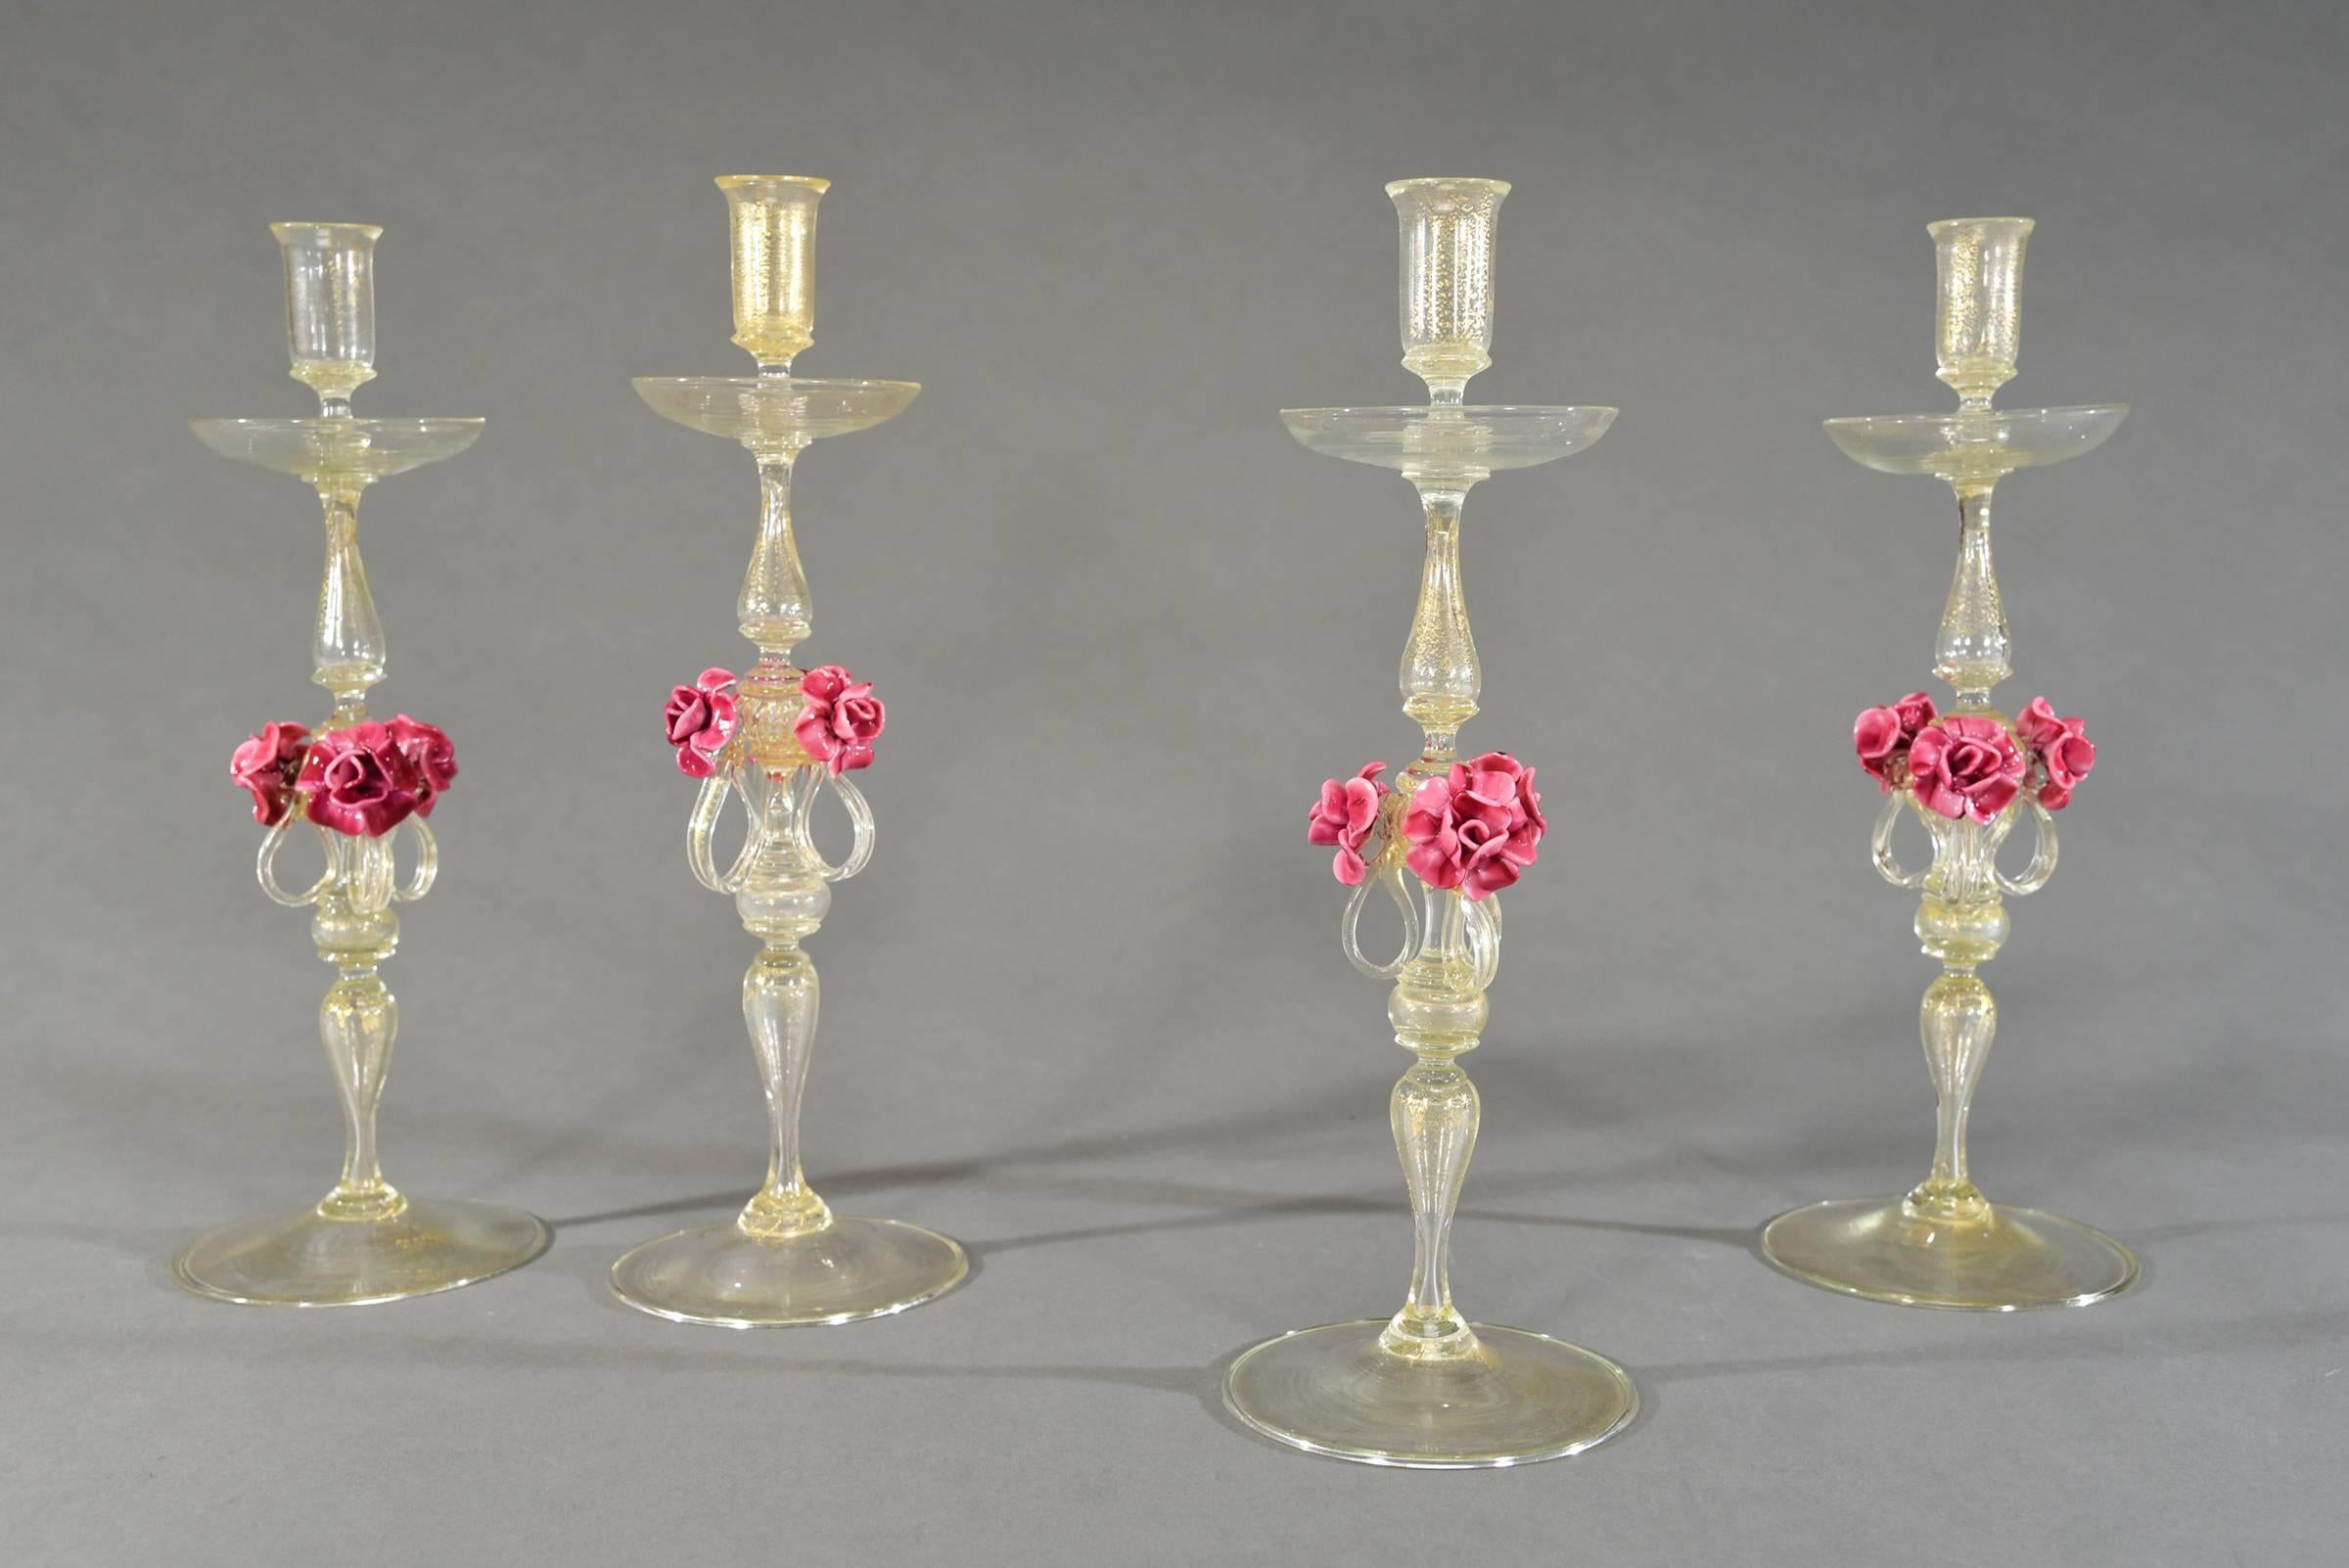 Italian 5 Pc. Venetian Centerpiece Set Candlesticks w/ Gold Leaf Applied Pink Roses For Sale